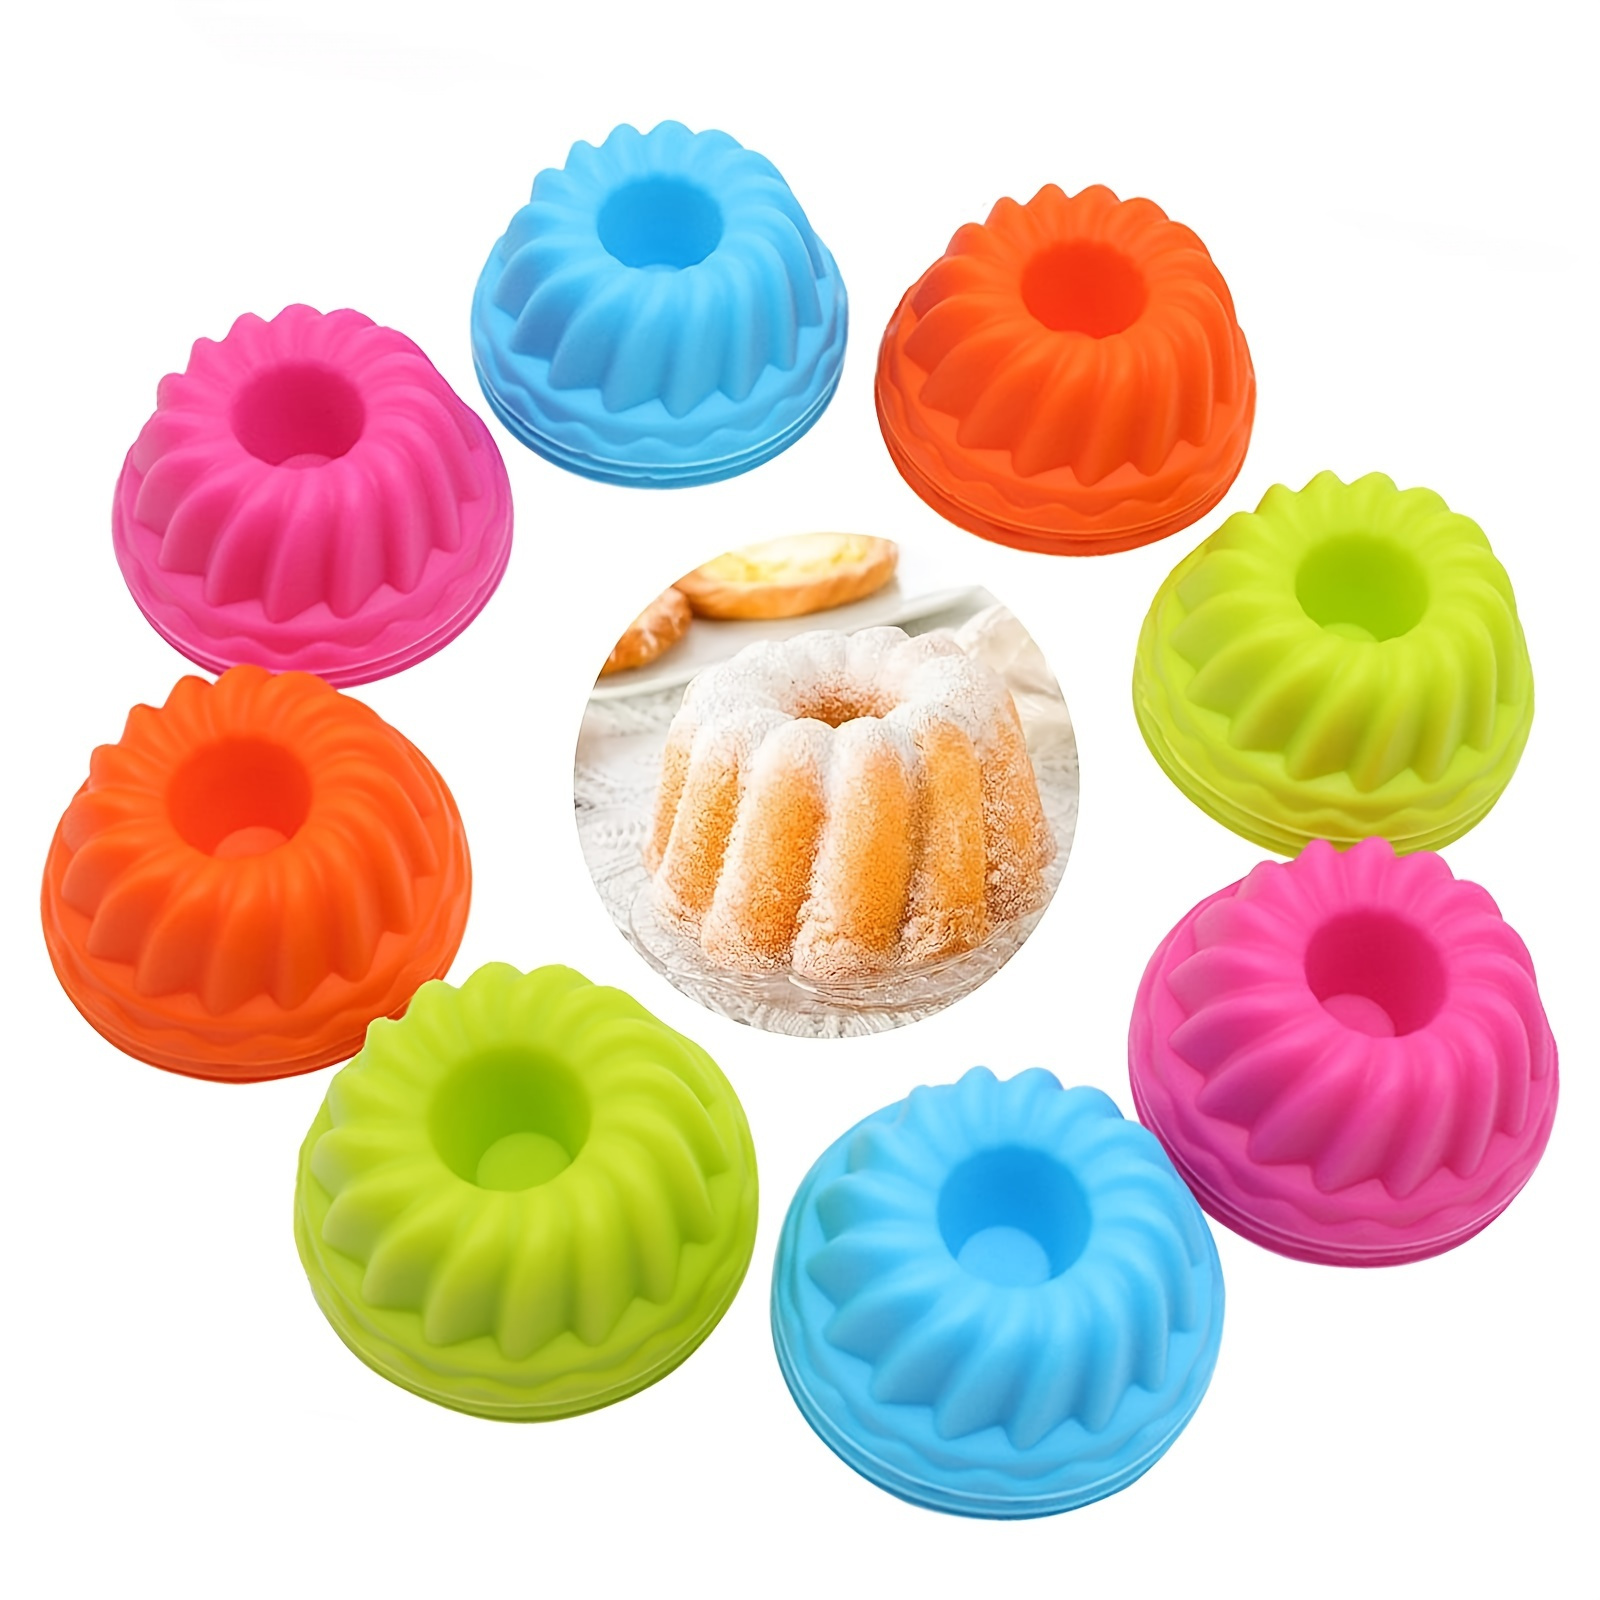 

12-pack Of Mini Silicone Baking Cake Molds - Nonstick Cupcake Liners, Bpa Free Fancy Dessert Trays - Perfect For Jelly & Muffins!